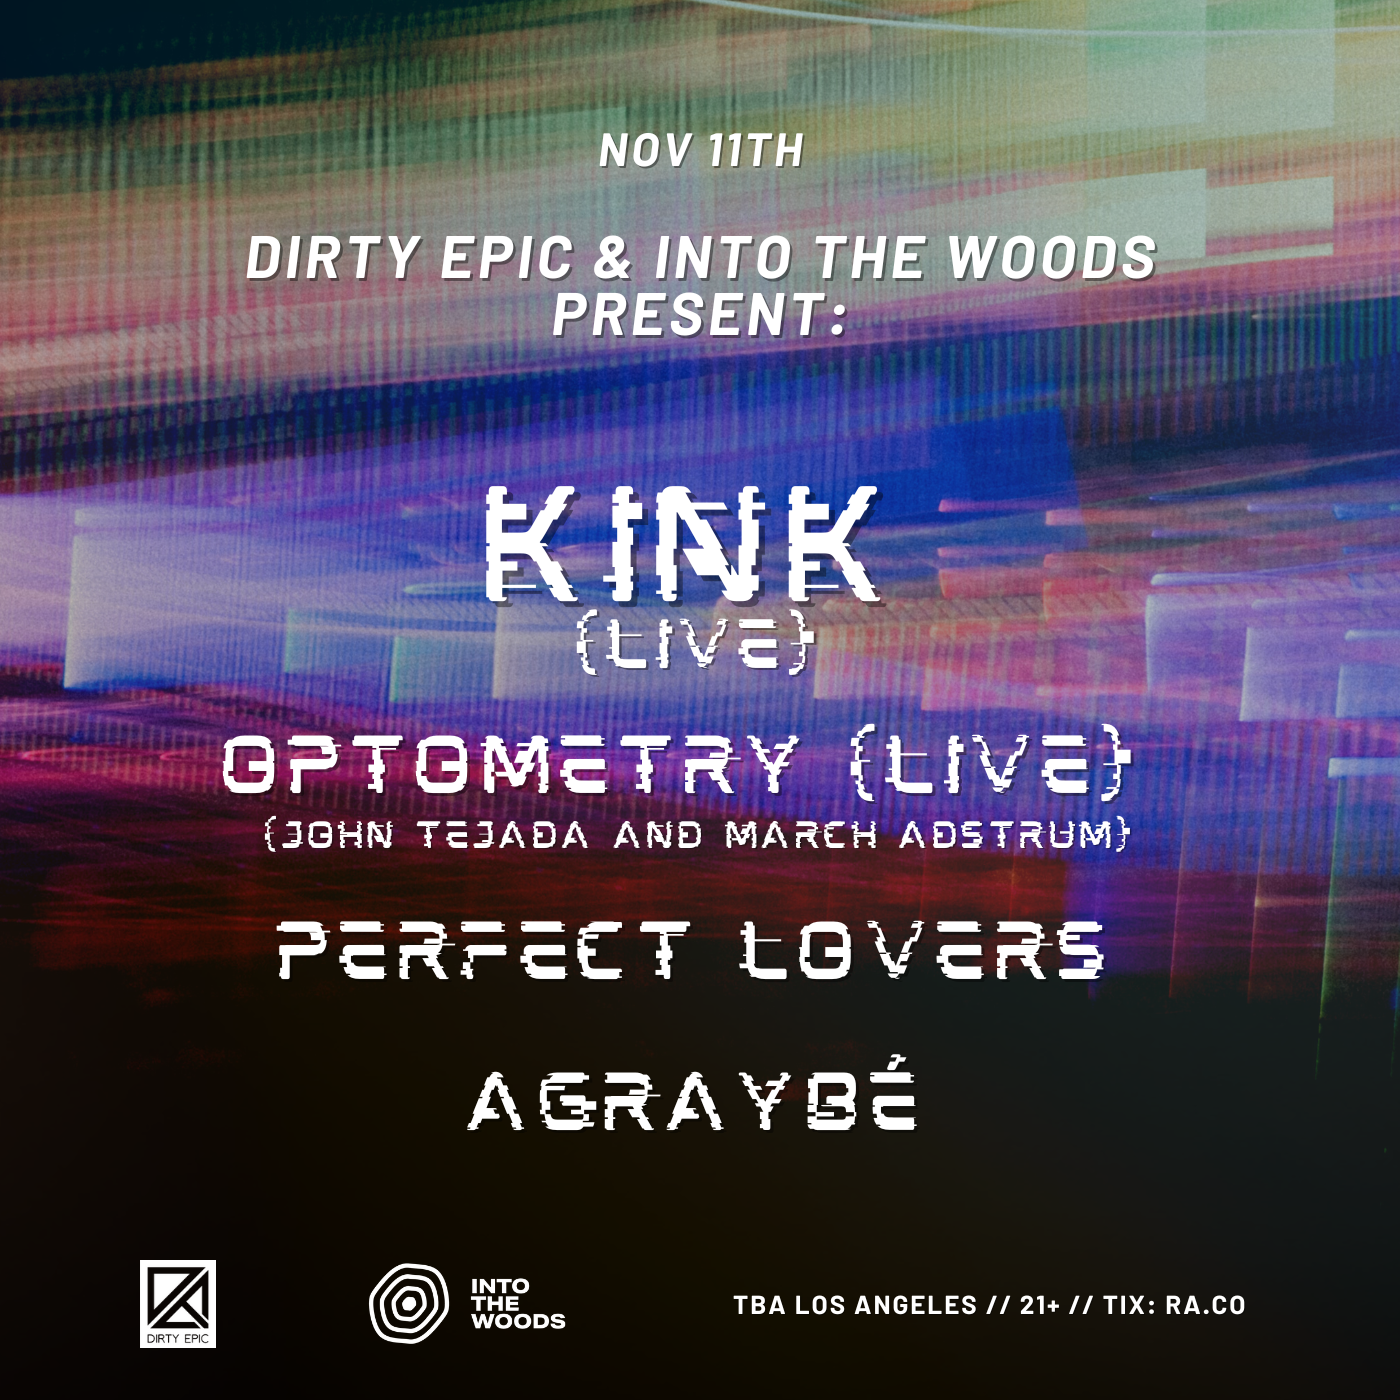 Dirty Epic and Into the Woods present: KiNK, Optometry Live, Perfect Lovers and agraybé - Página frontal